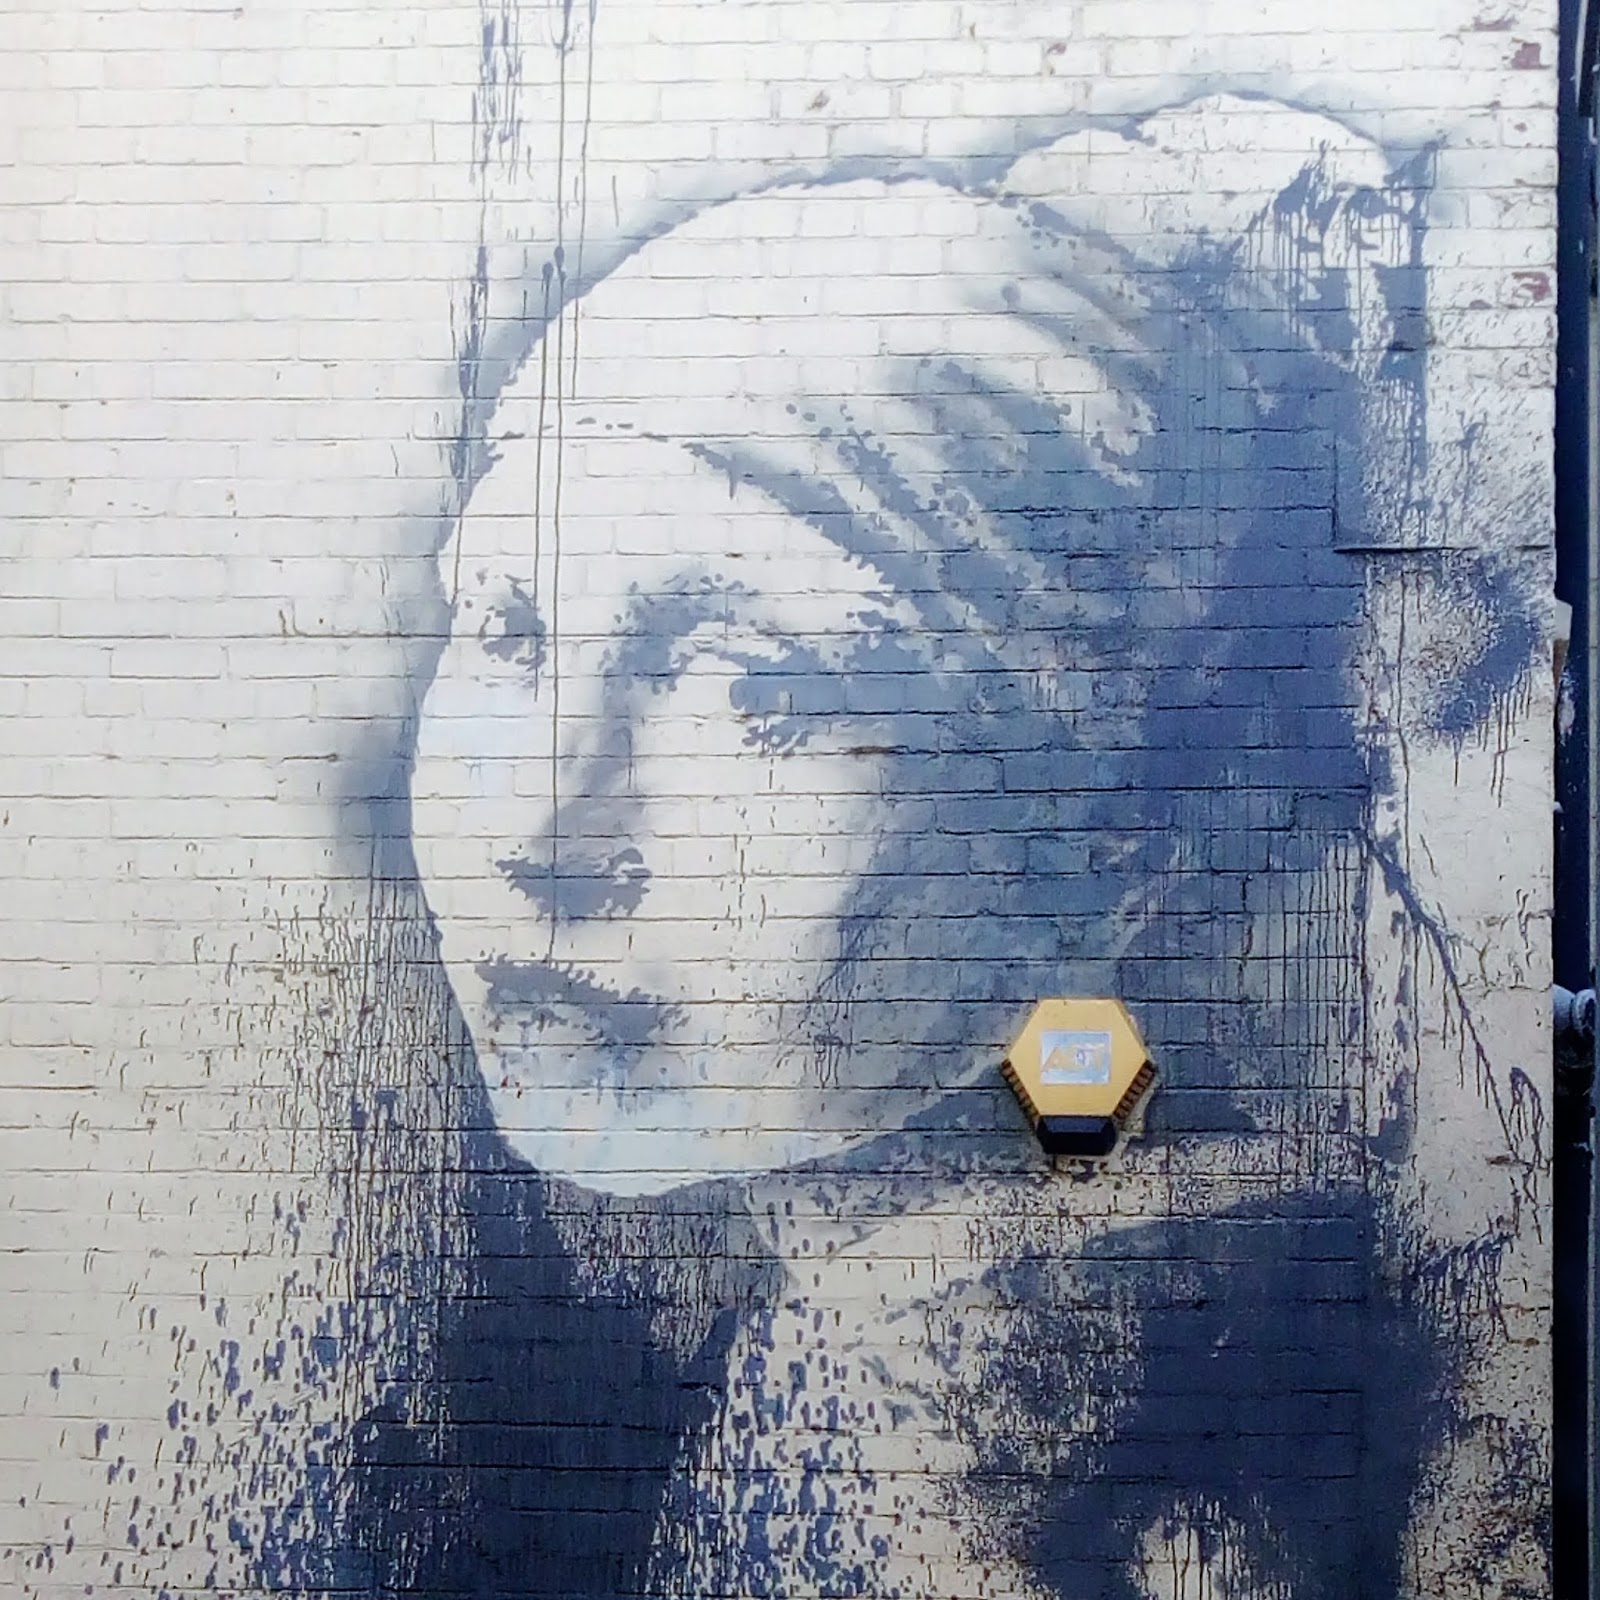 How to Find Banksy Art in Bristol | The Parent Game